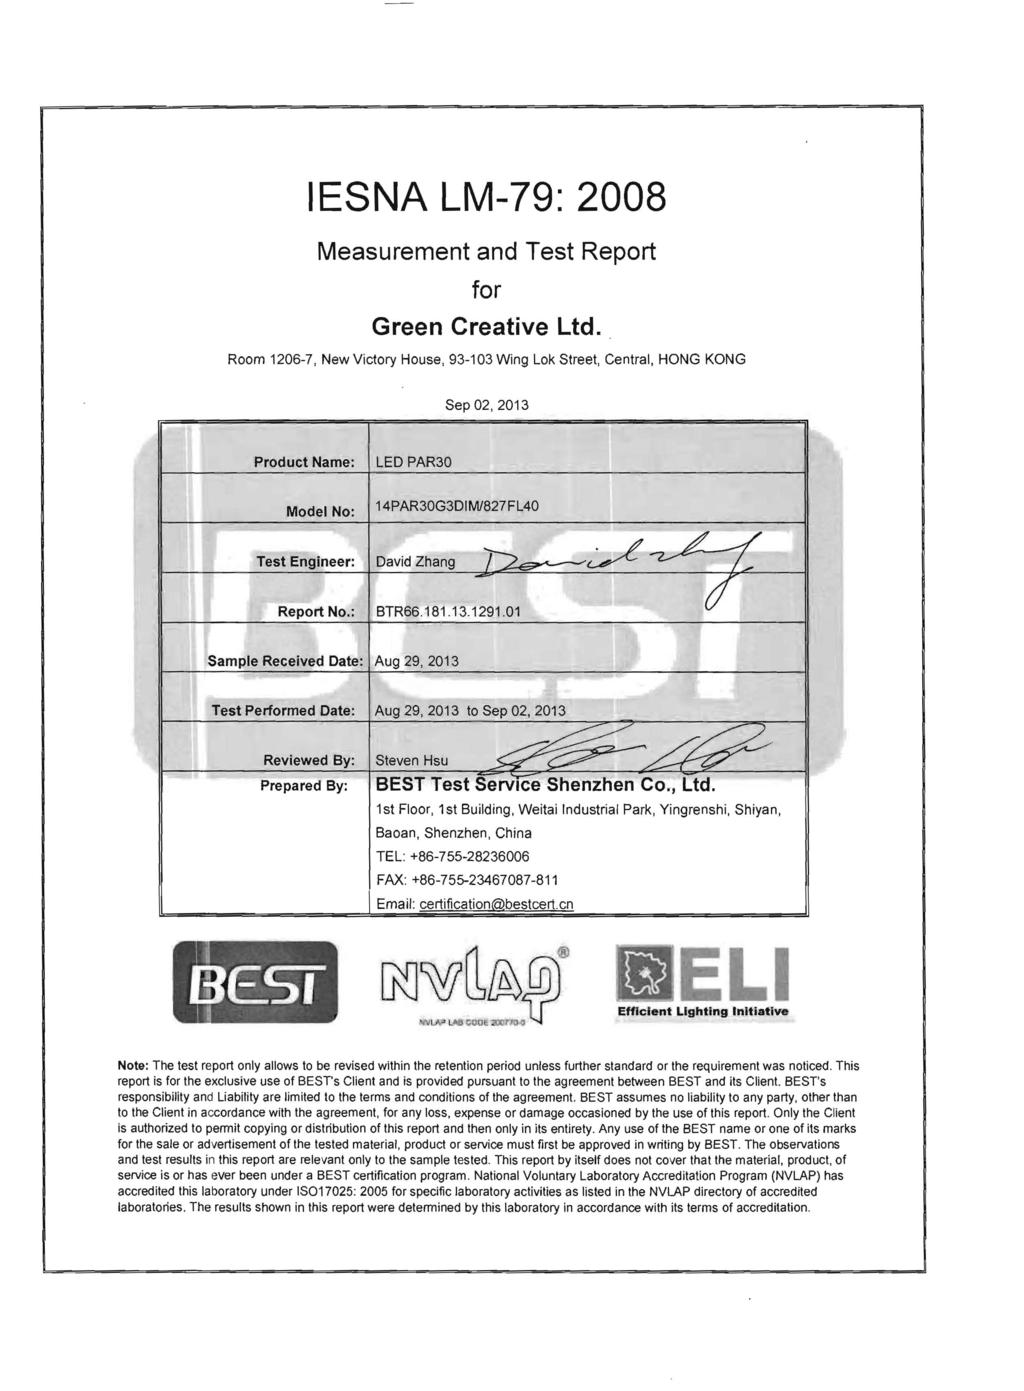 IESNA LM-79: 2008 Measurement and Test Report for Green Creative Ltd.